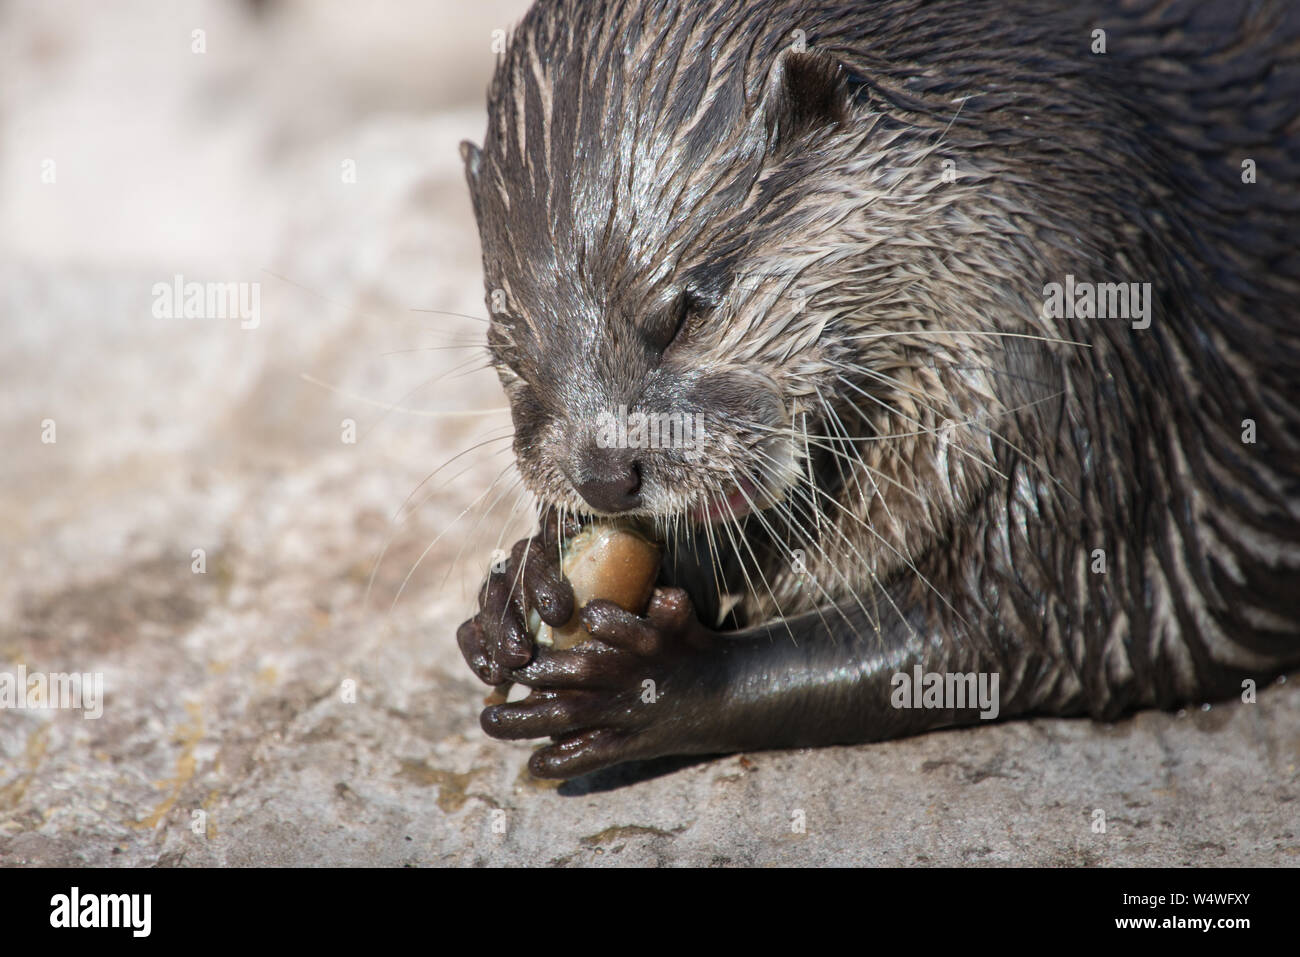 Asian small-clawed otter, Amblonyx cinerea eating Stock Photo